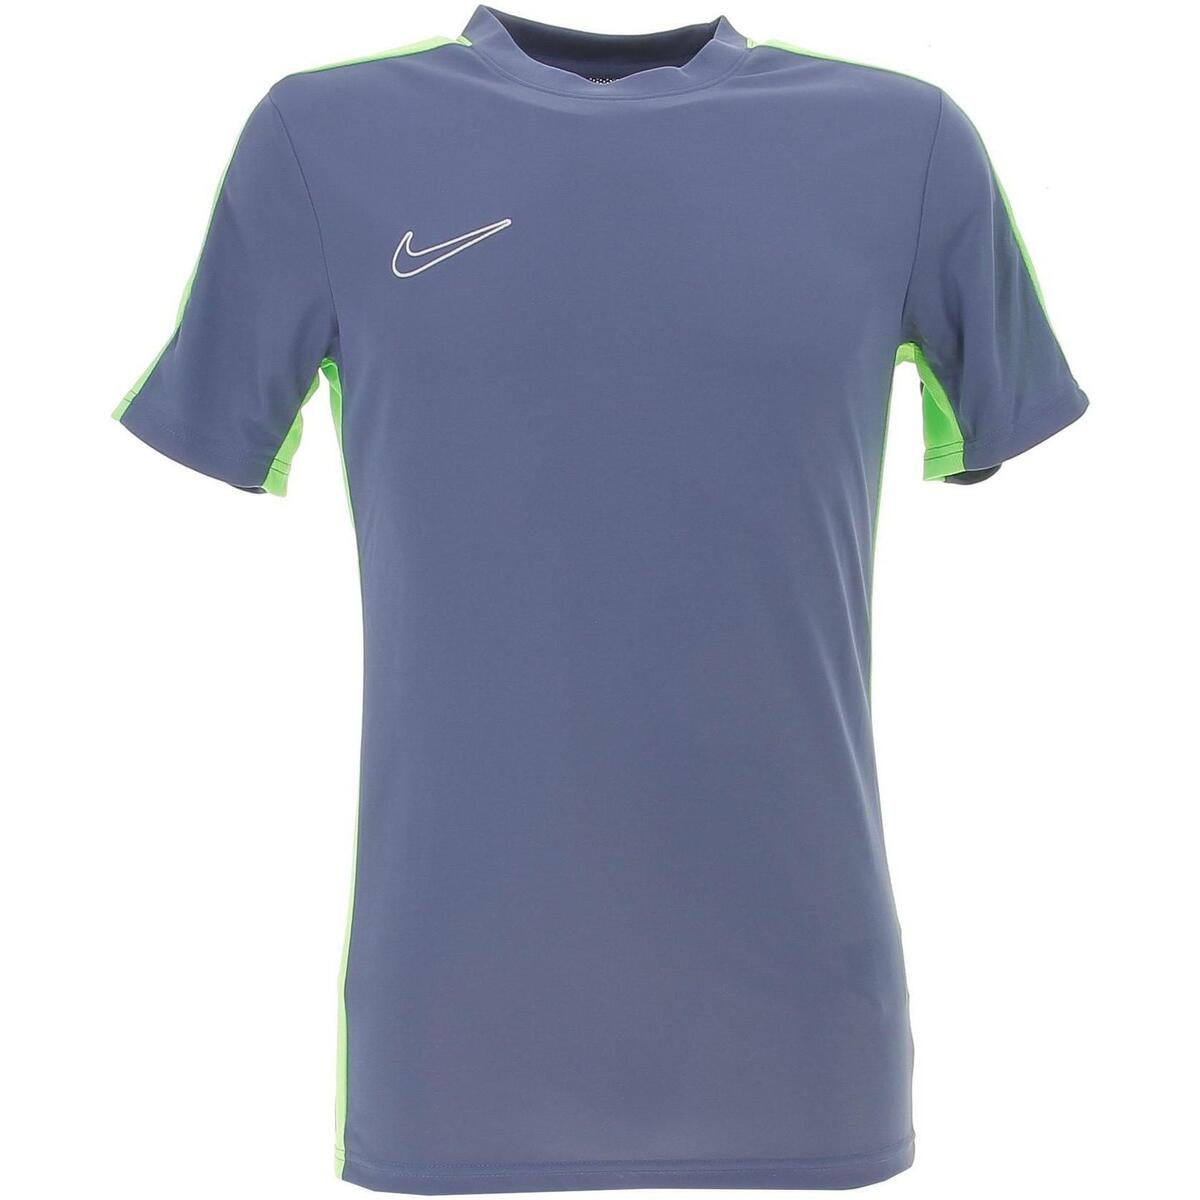 Nike M nk df acd23 top ss br 26364160 1200 A